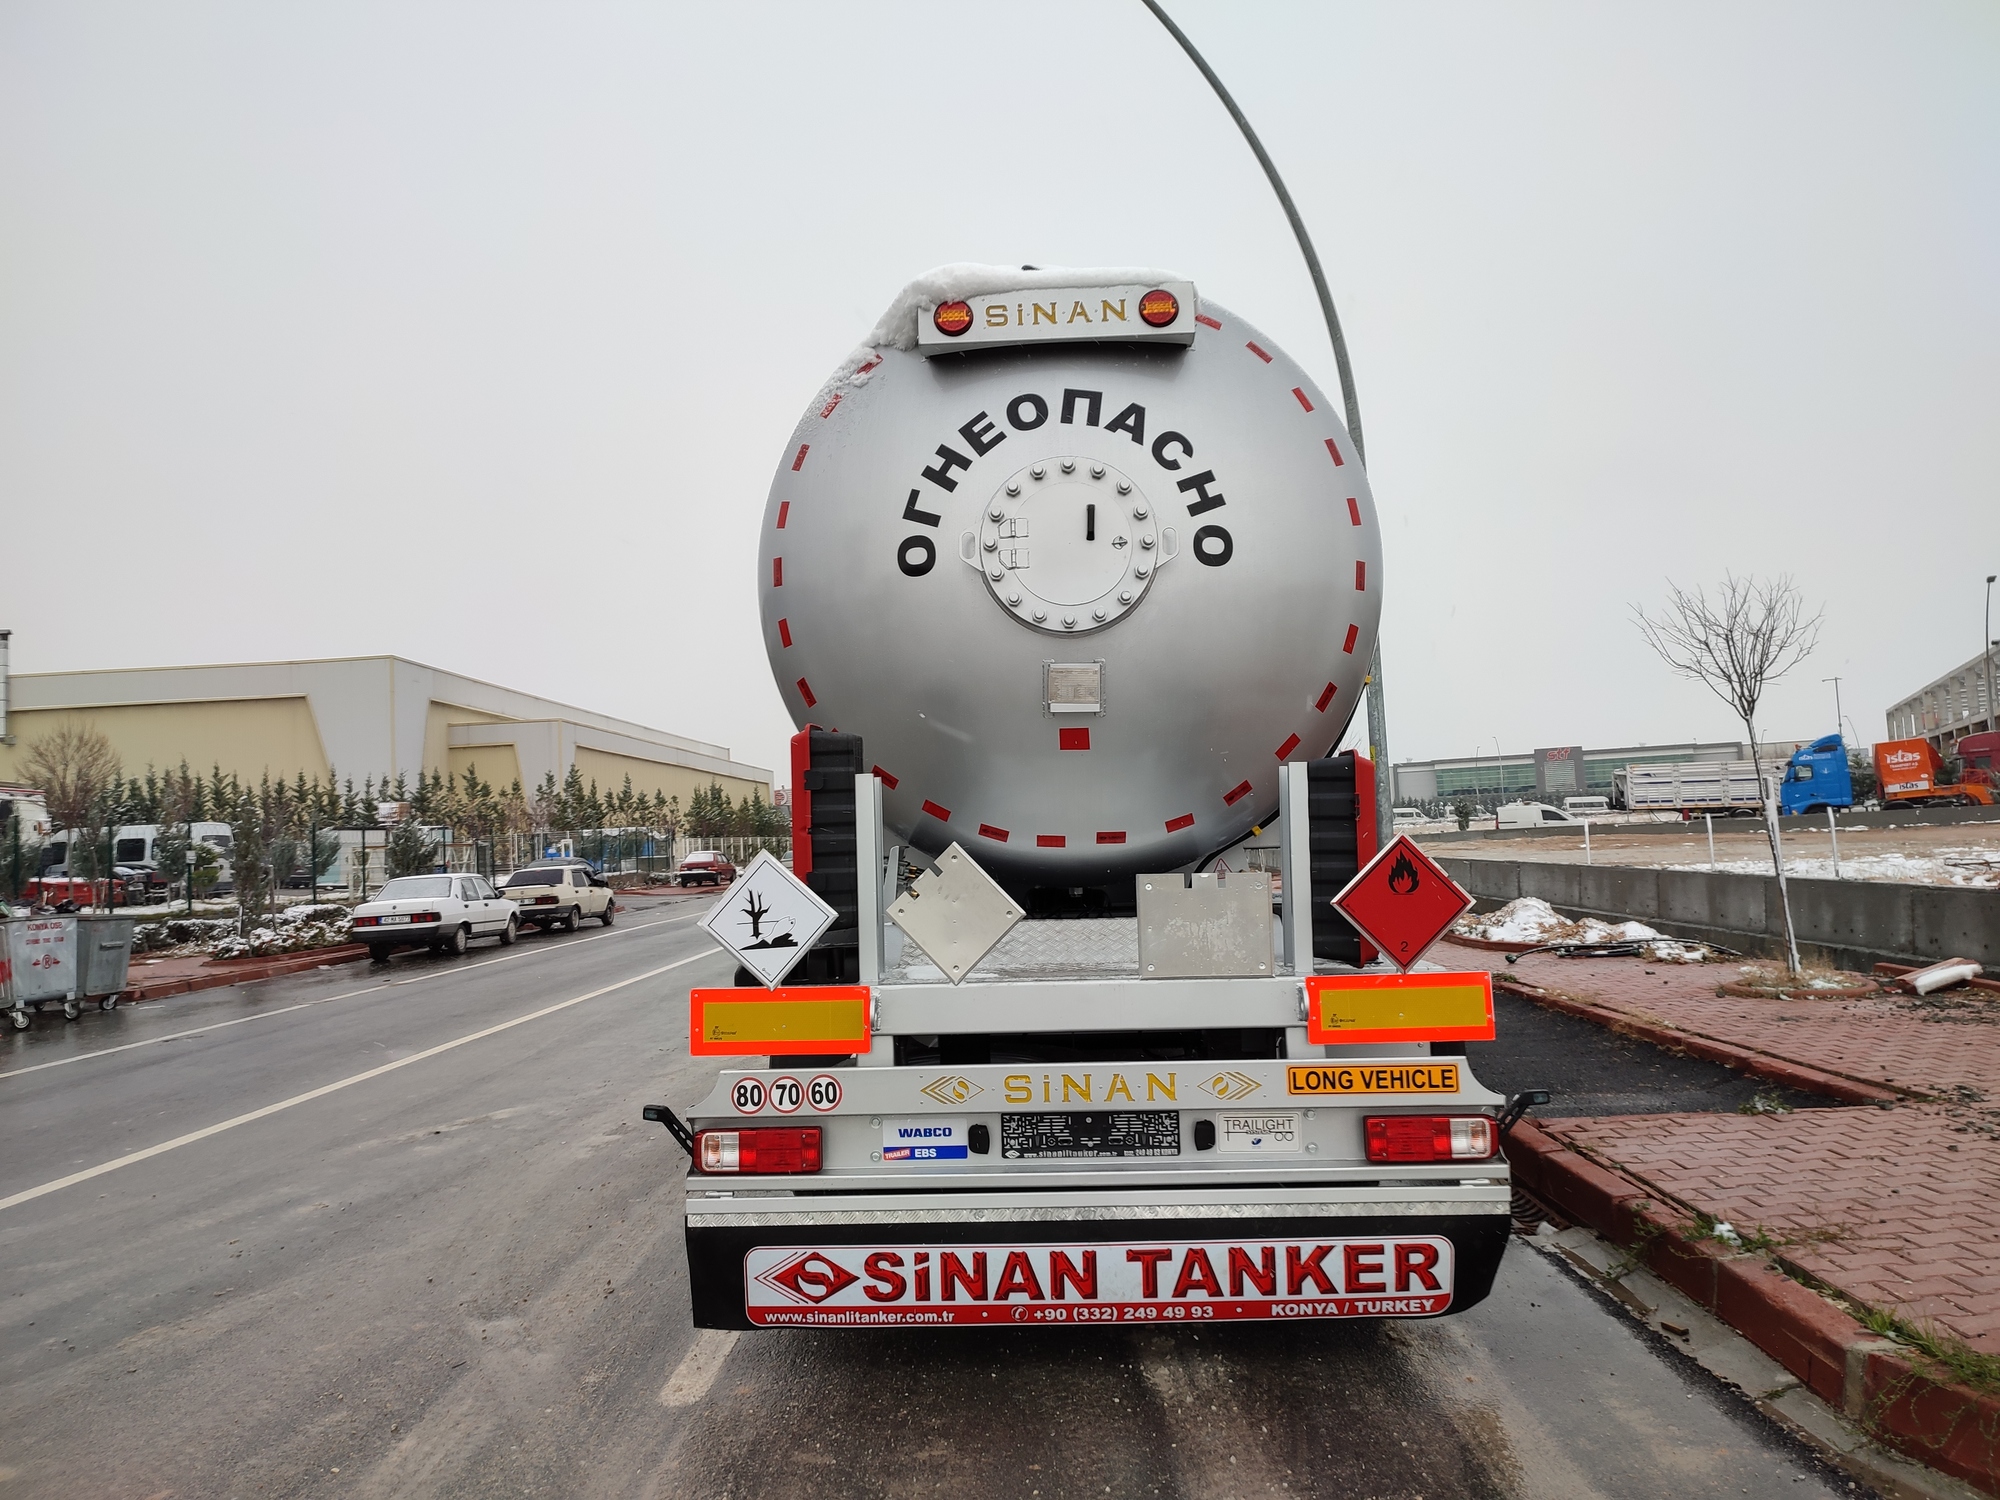 SİNANLI TANKER - TRAILER undefined: photos 41